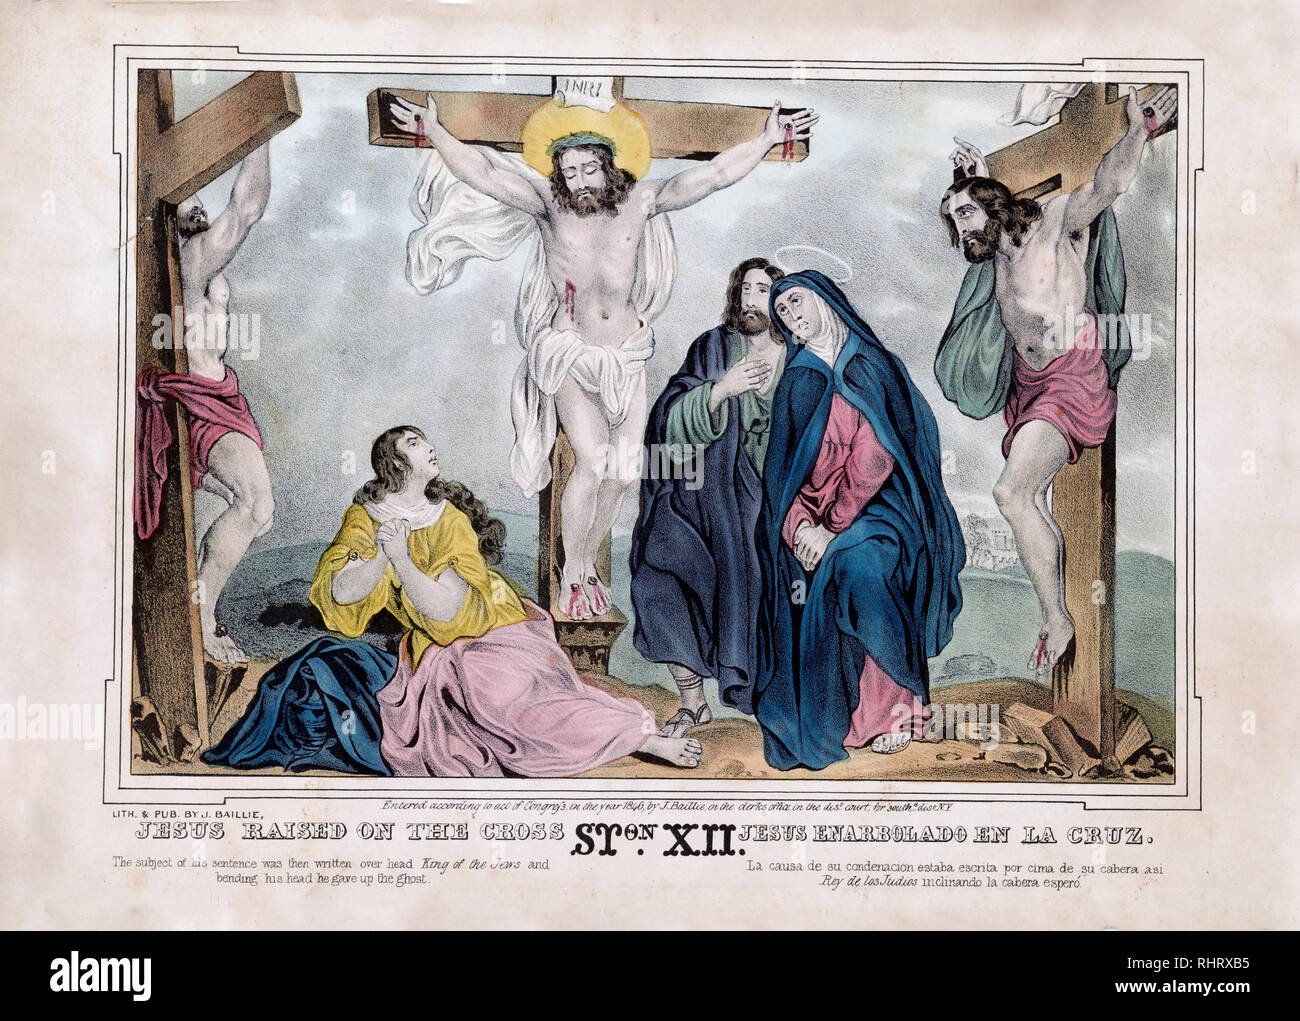 Jesus Christ and two men on crosses, Mary and others mourning below. Stock Photo